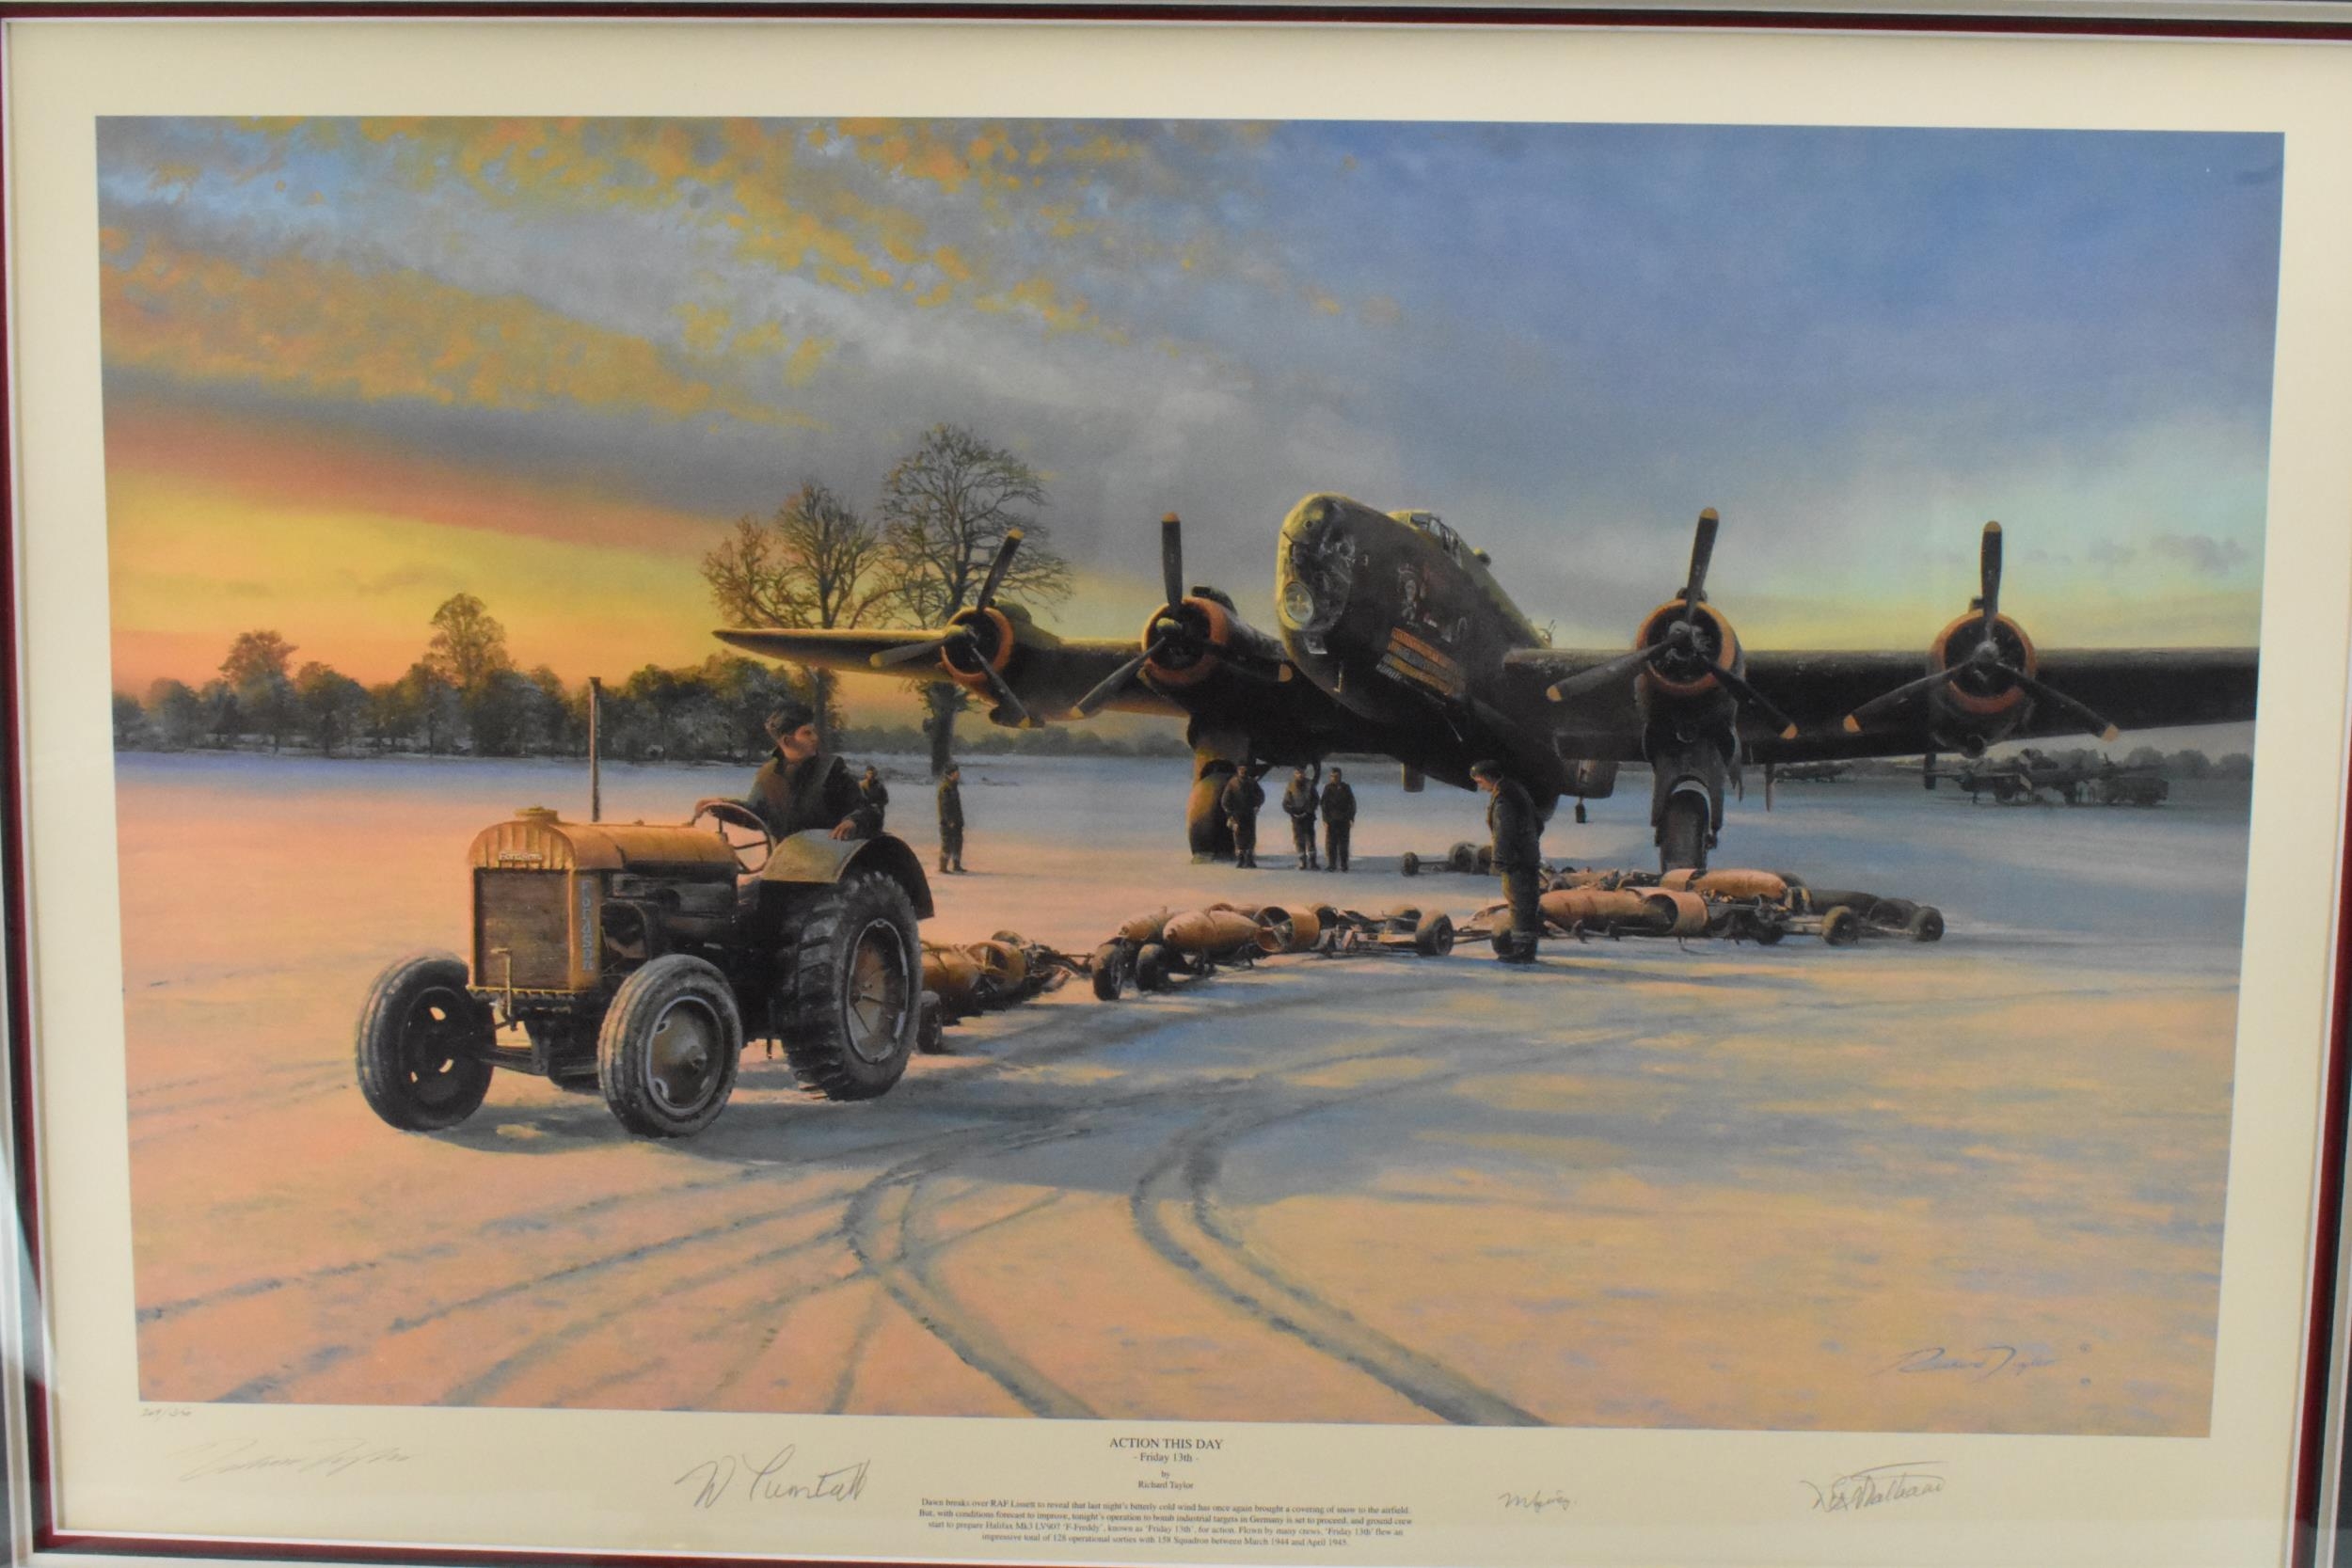 Richard Taylor - A signed limited edition print entitled 'Action This Day', numbered 269/350, - Image 2 of 5